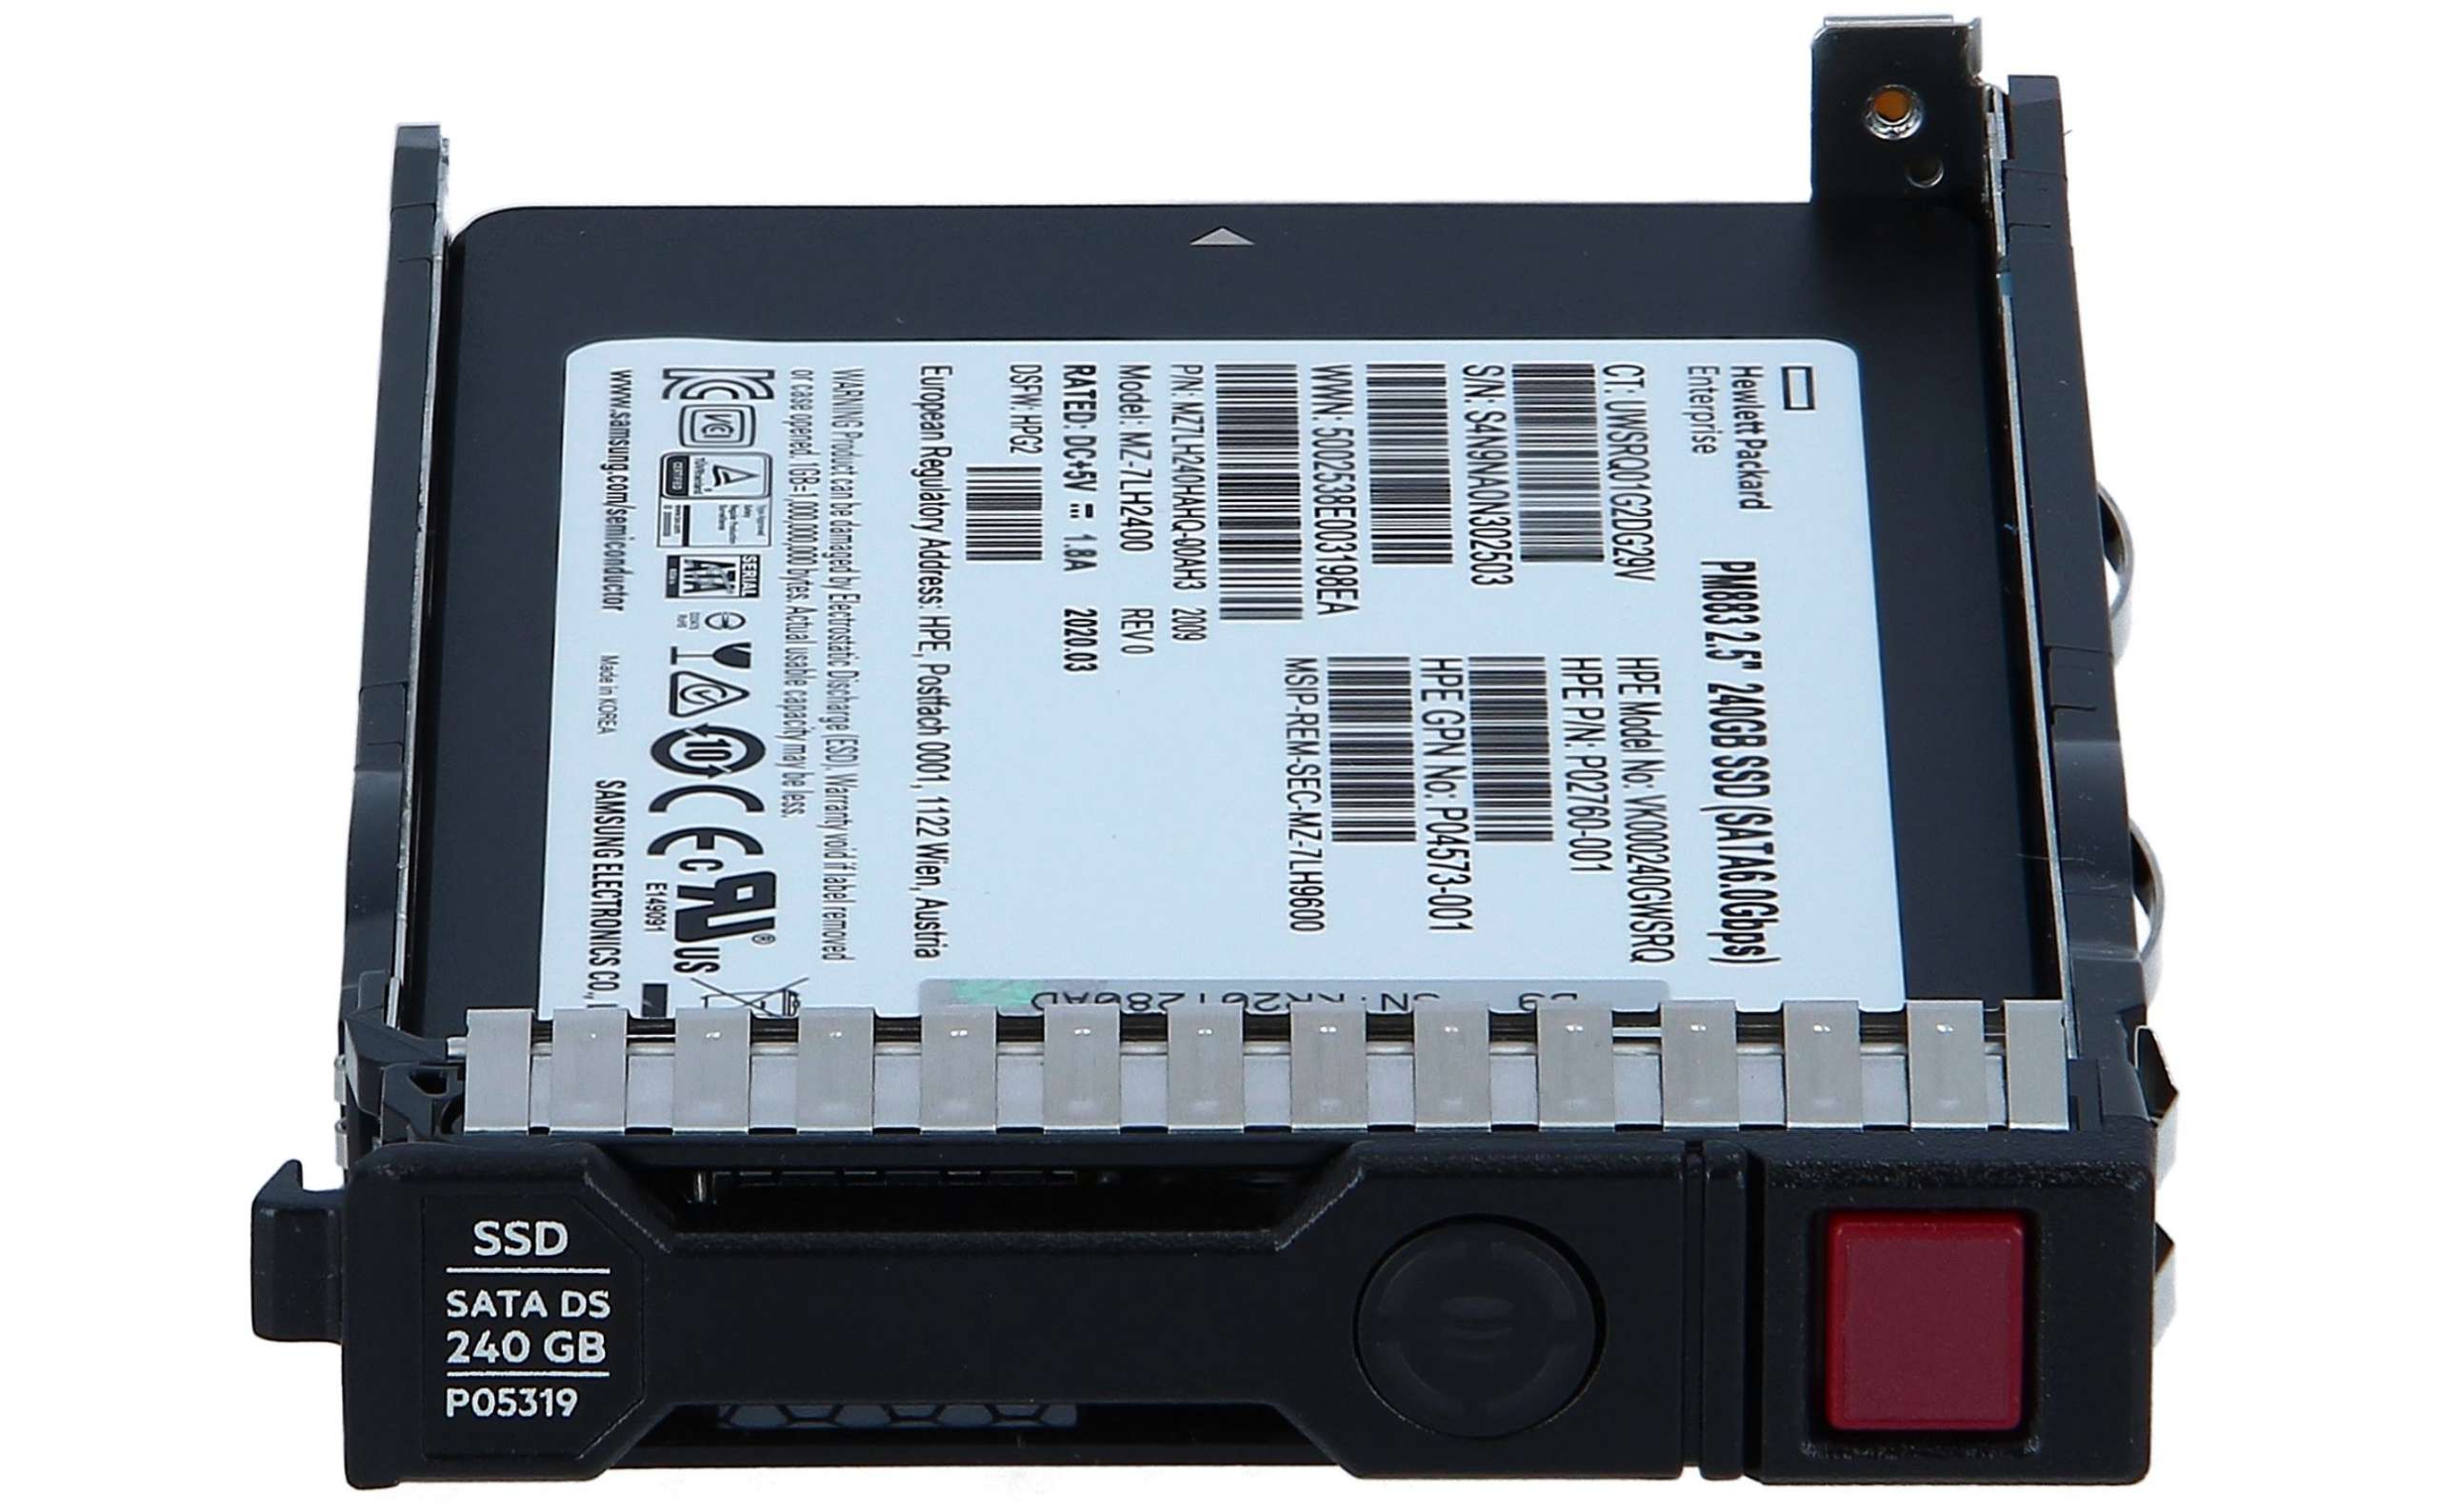 HP Enterprise - P04556-B21 - HP Enterprise Read Intensive - 240 GB SSD - Hot-Swap - SFF (6.4 cm SFF) new and refurbished online low prices